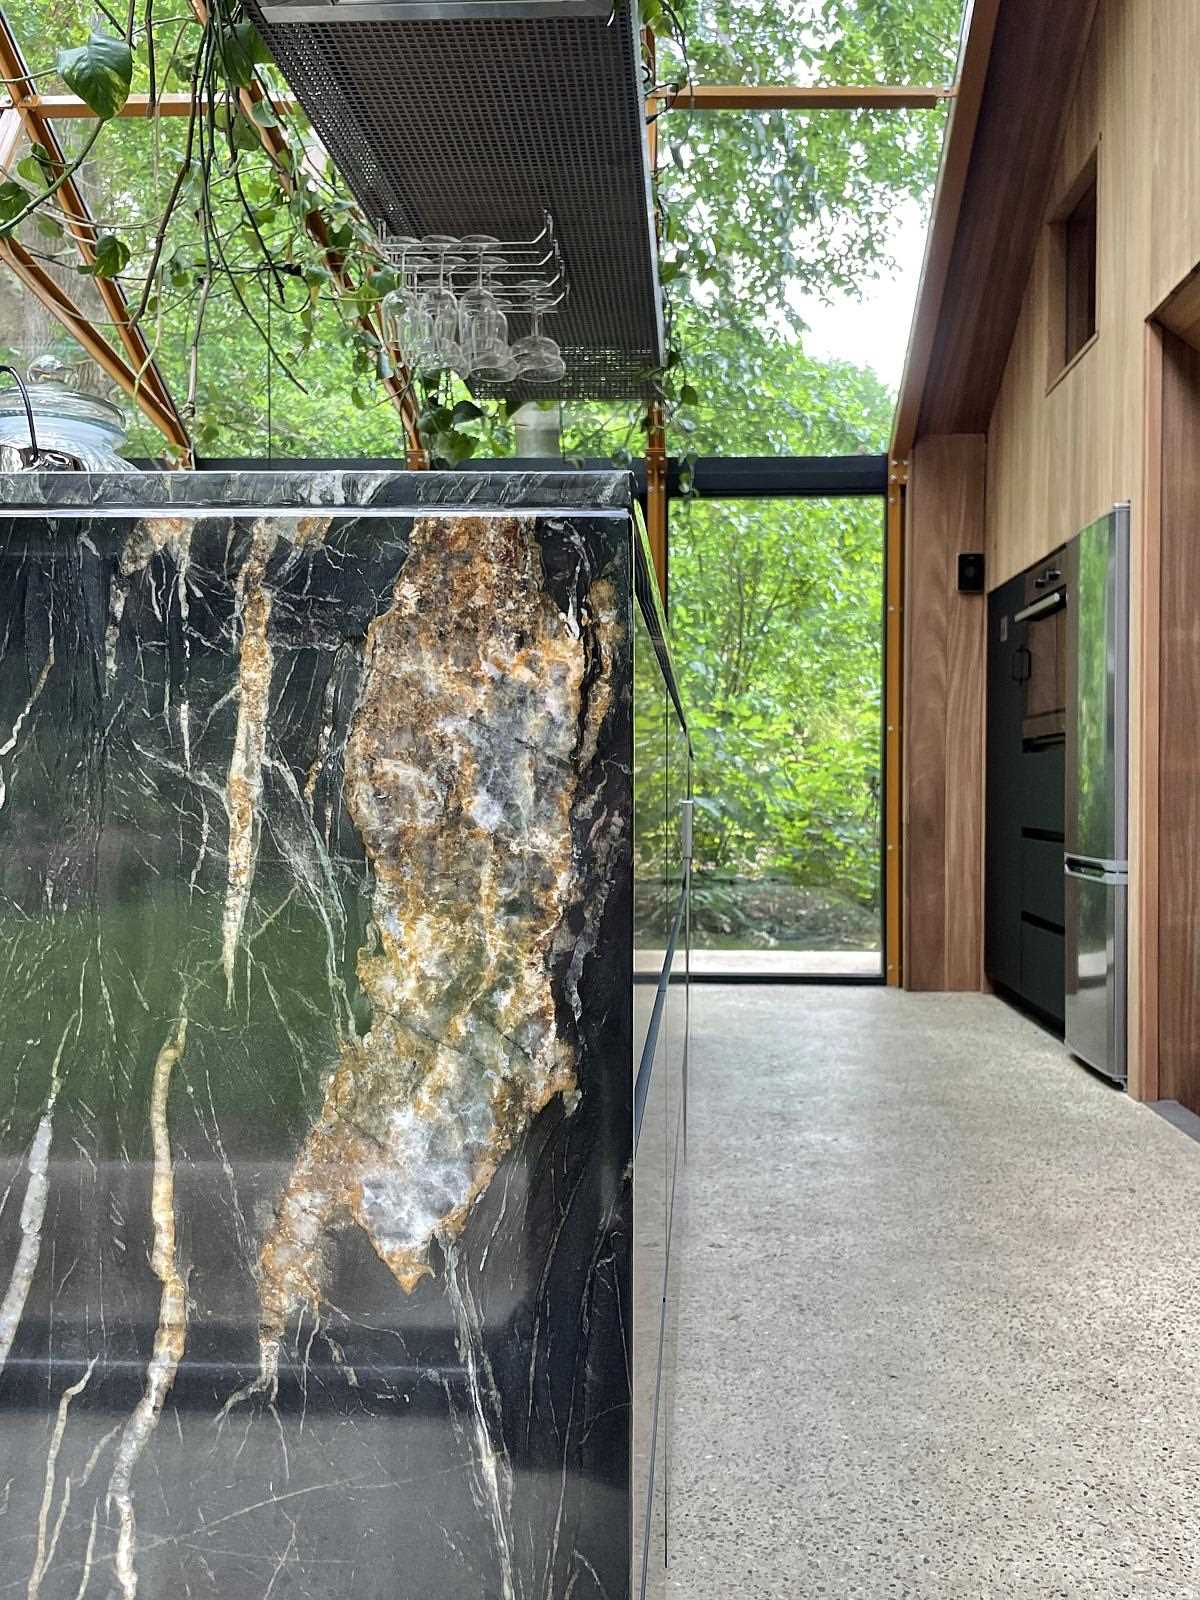 A curved Belvedere quartzite countertop connects through the kitchen, while the wood cabinets complement the wood structure of the home.